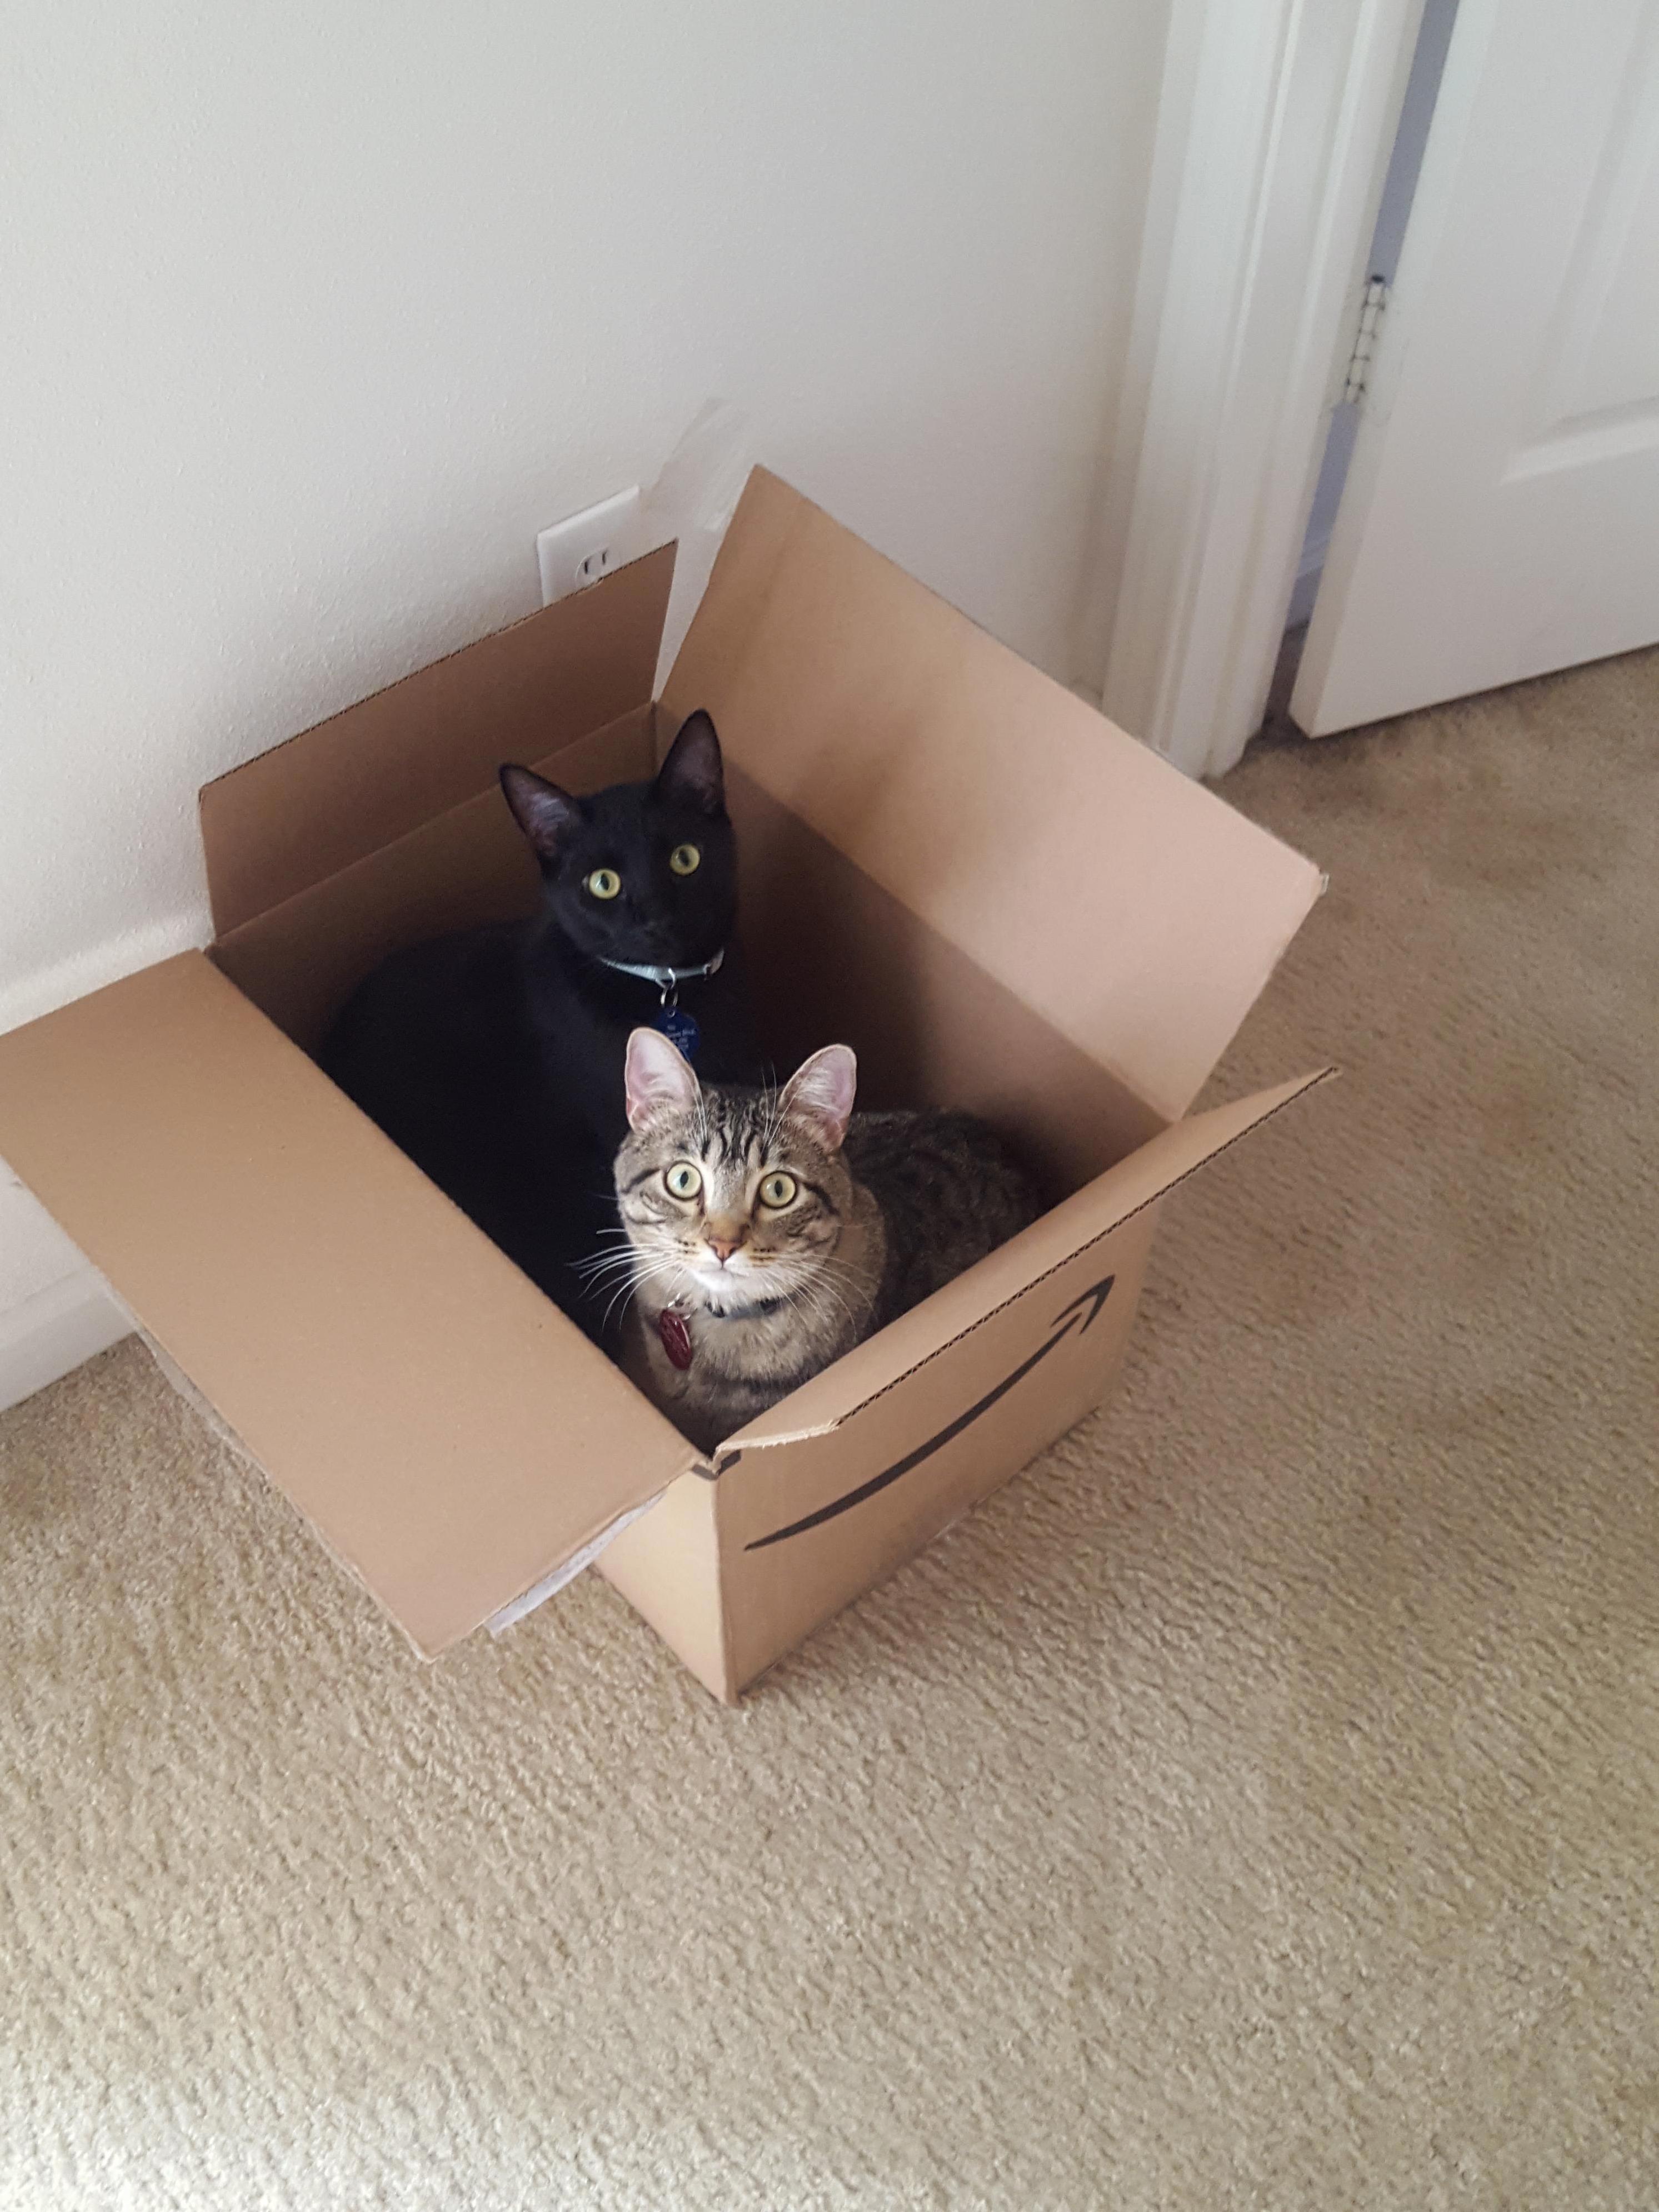 They love it when i order things online